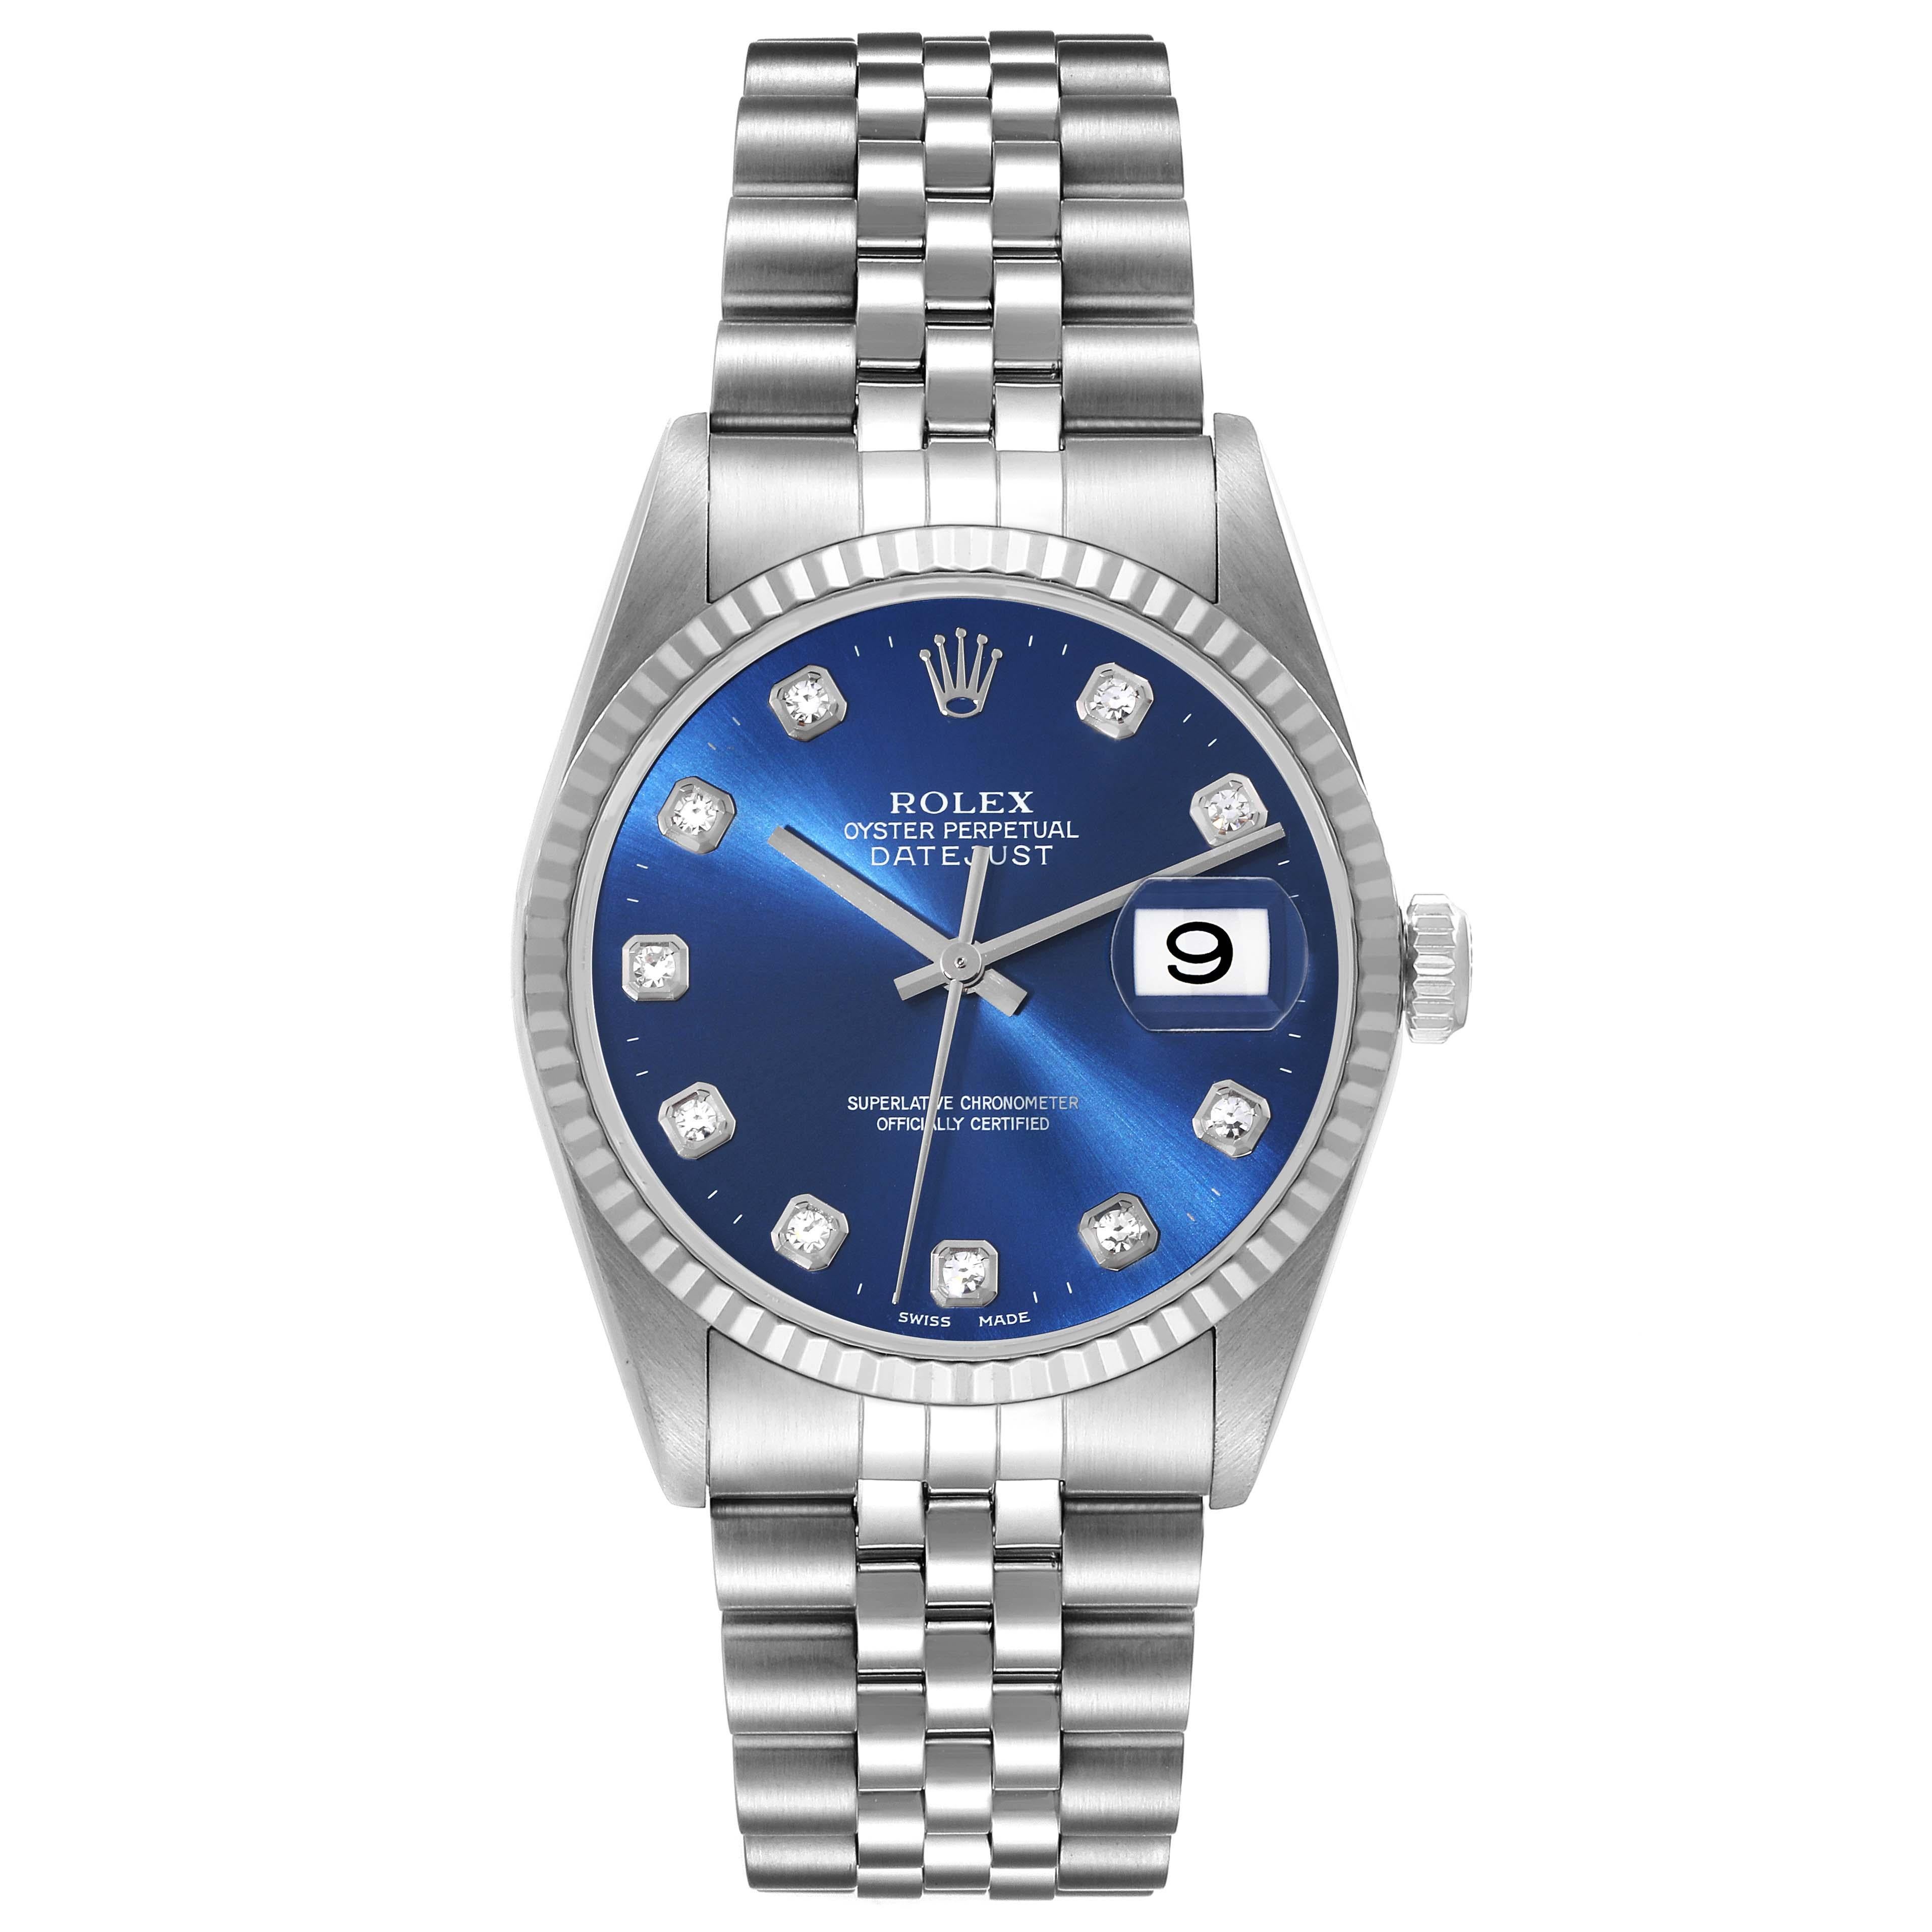 Rolex Datejust Steel White Gold Blue Diamond Dial Mens Watch 16234 Box Papers. Officially certified chronometer automatic self-winding movement. Stainless steel oyster case 36.0 mm in diameter. Rolex logo on a crown. 18k white gold fluted bezel.